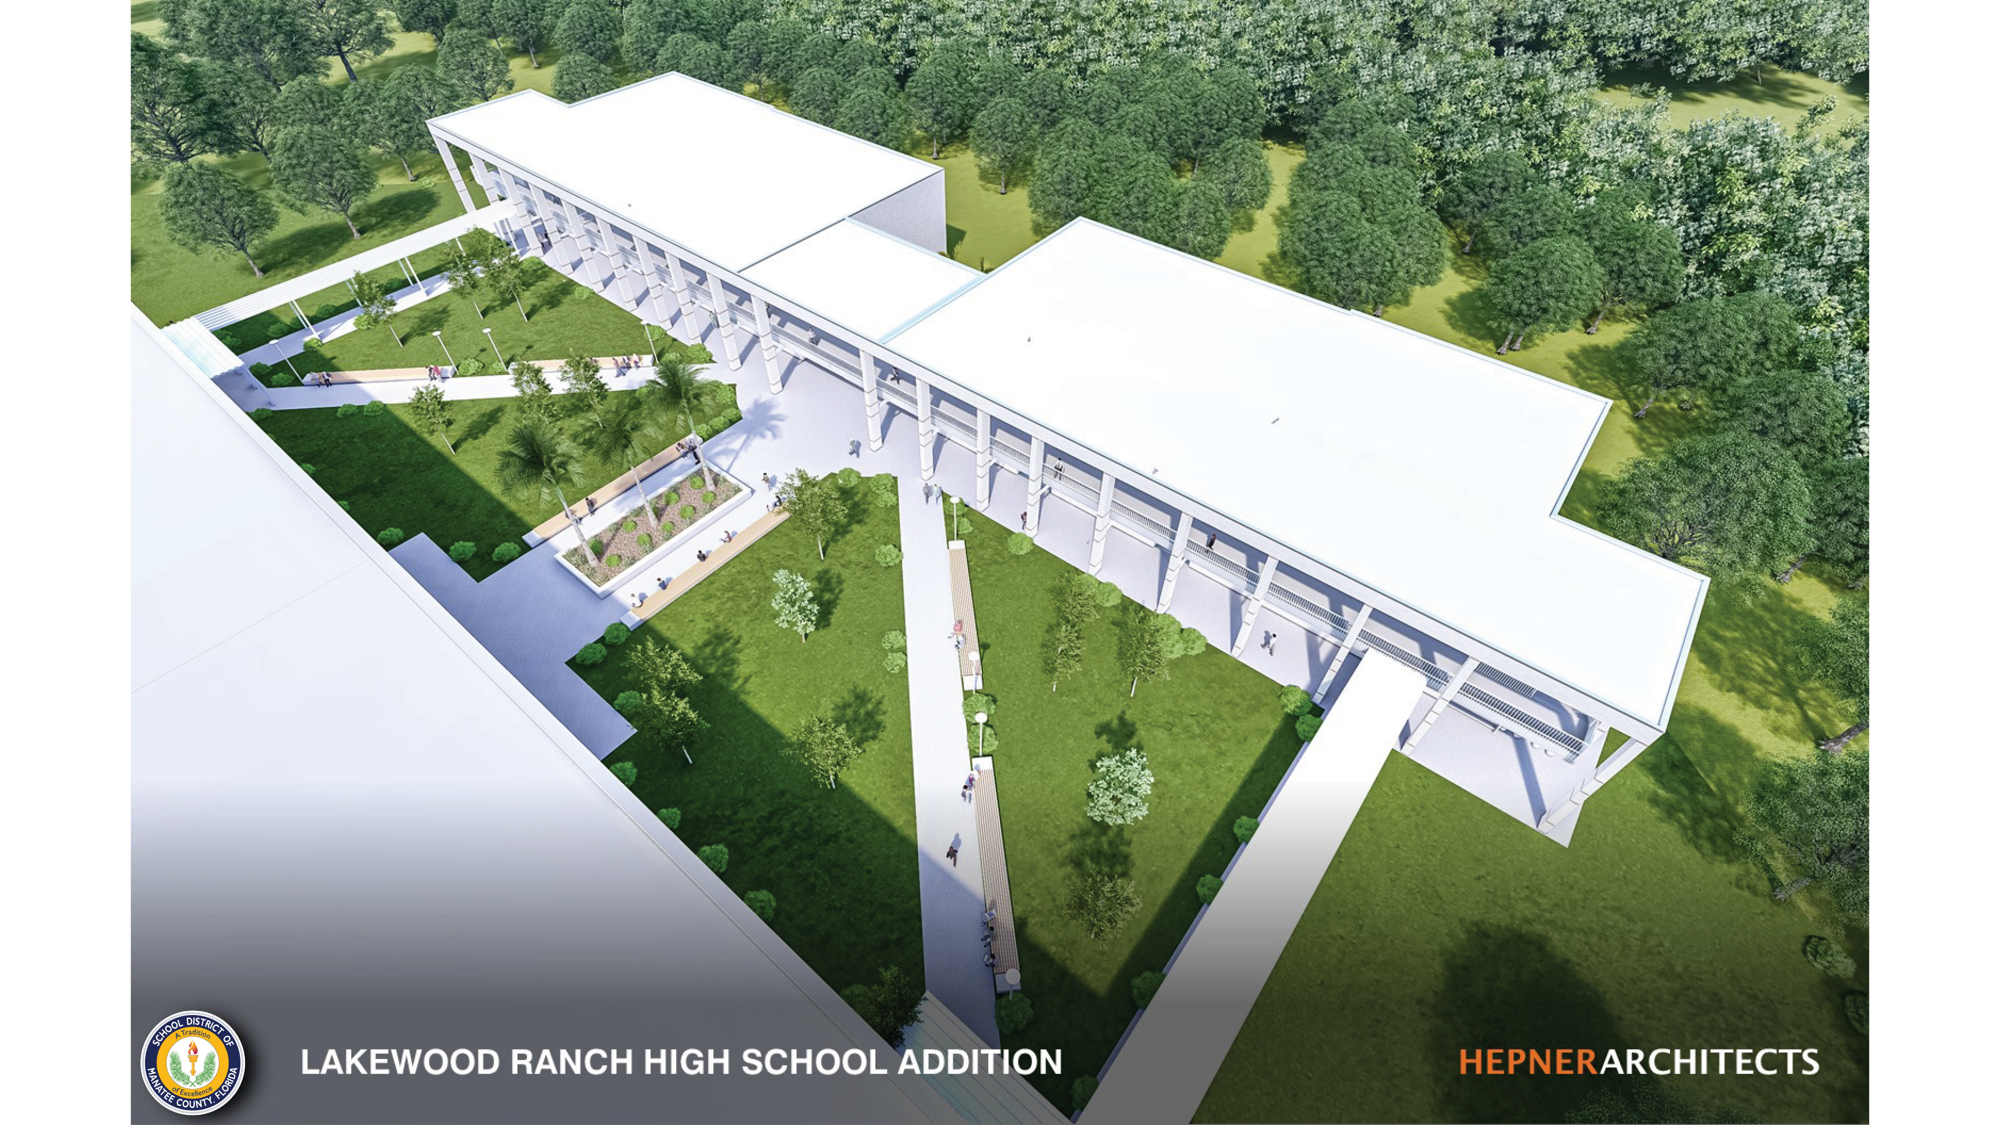 The new Lakewood Ranch High addition will connect to Building 5, which will allow for a new courtyard to be created for students to gather. (Rendering courtesy of Hepner Architects and the School District of Manatee County.)